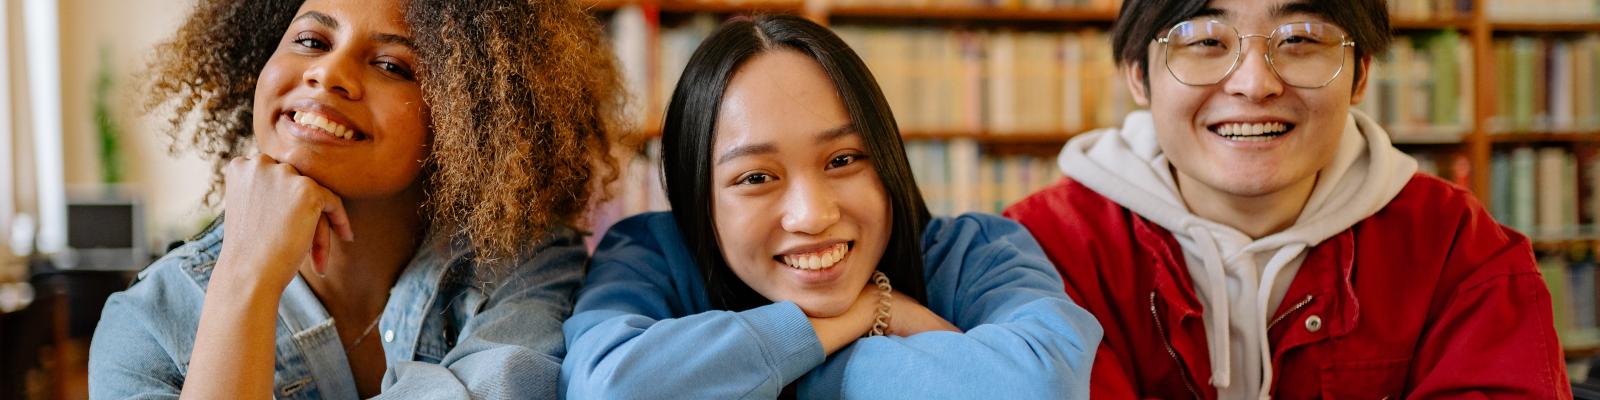 Smiling teens with books